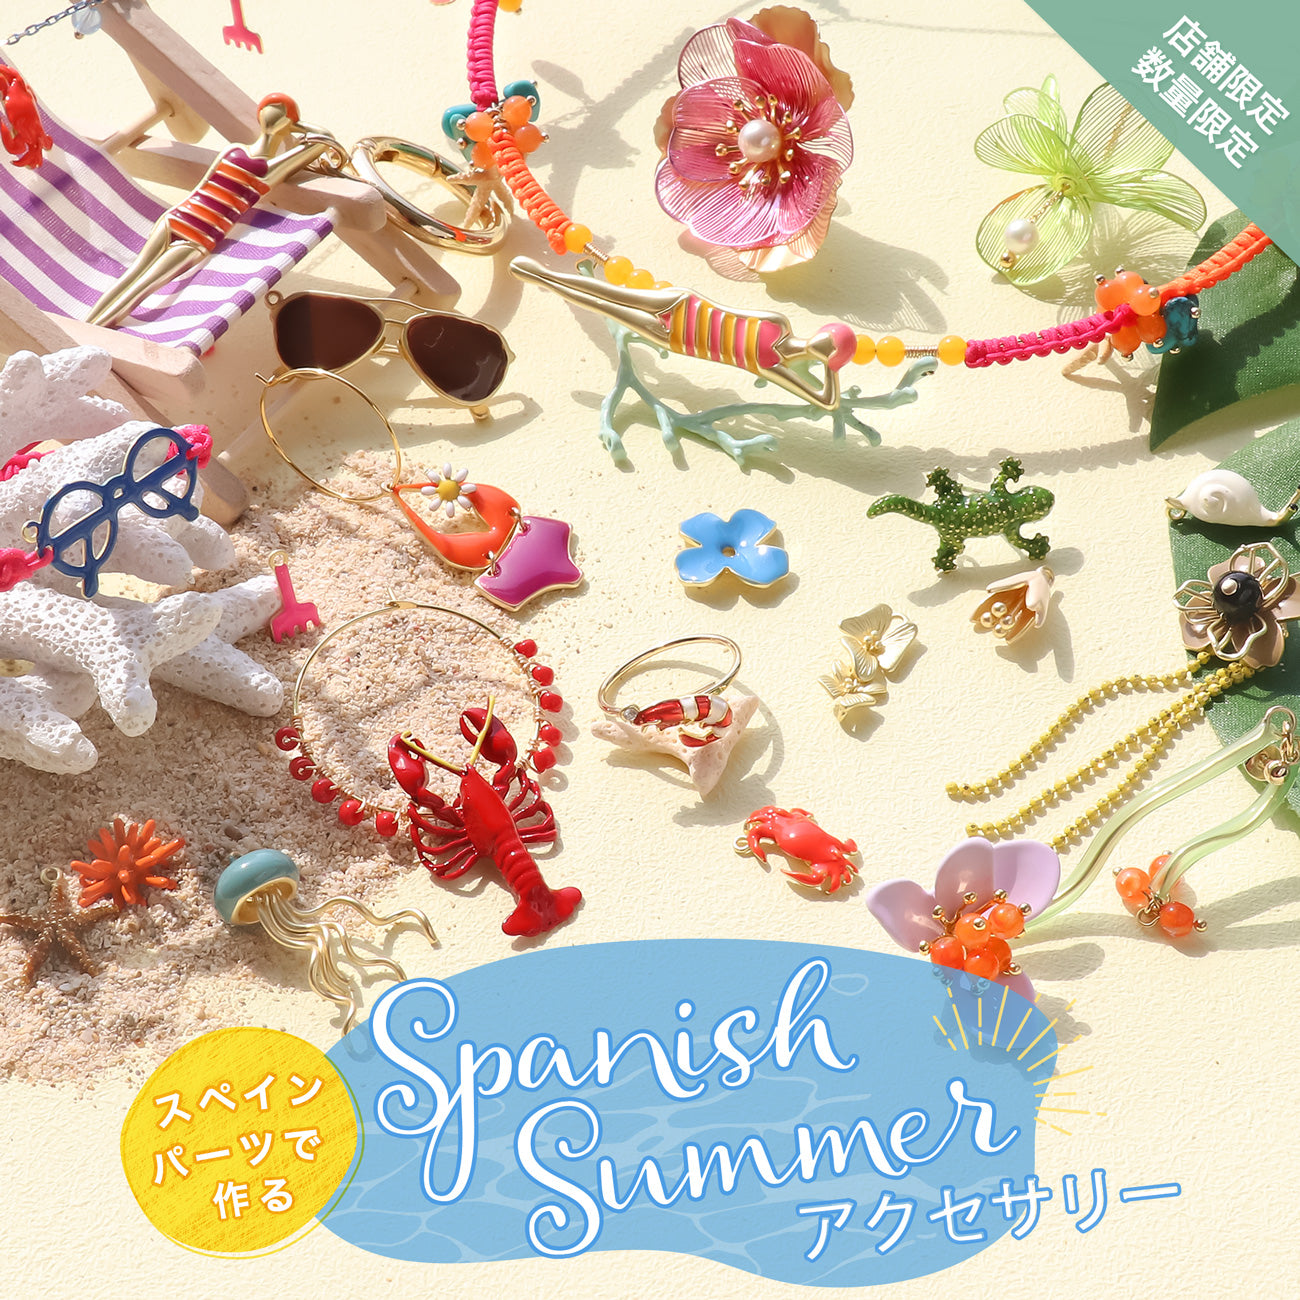 Spanish Summer Accessories made with Spanish parts Spanish Summer Accessories